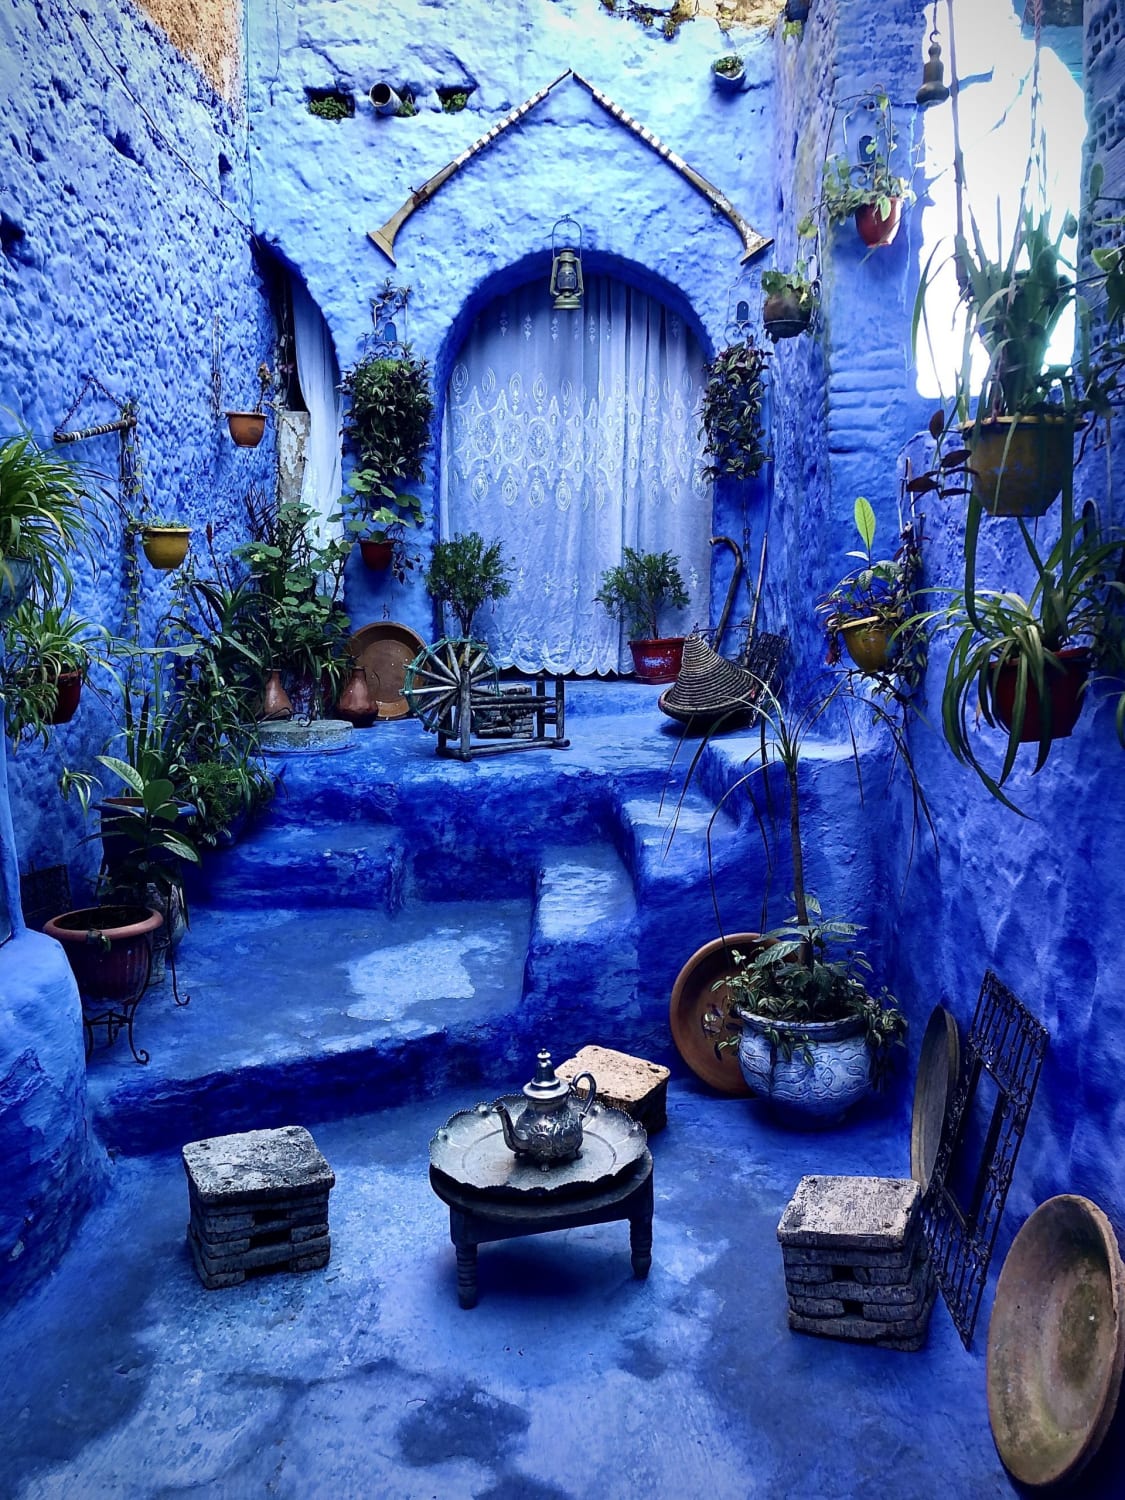 Chefchaouen, the Blue Pearl in Morocco